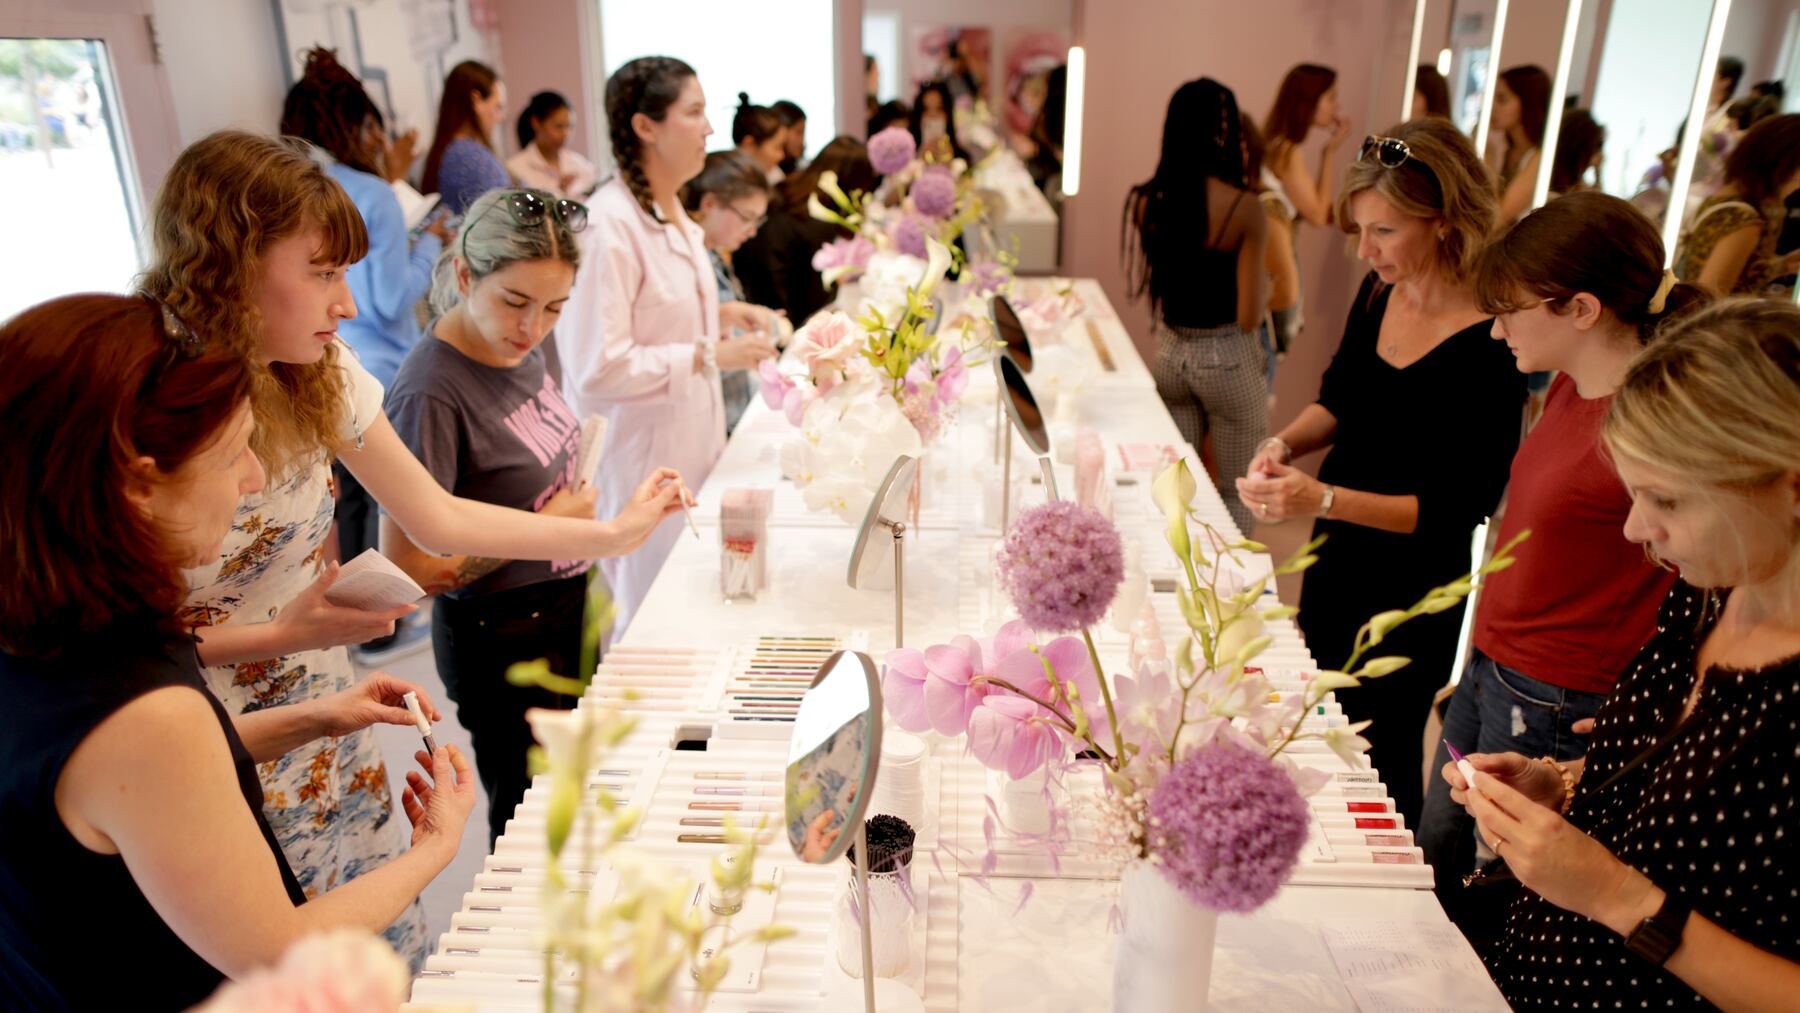 Customers try out products at a Glossier pop-up.